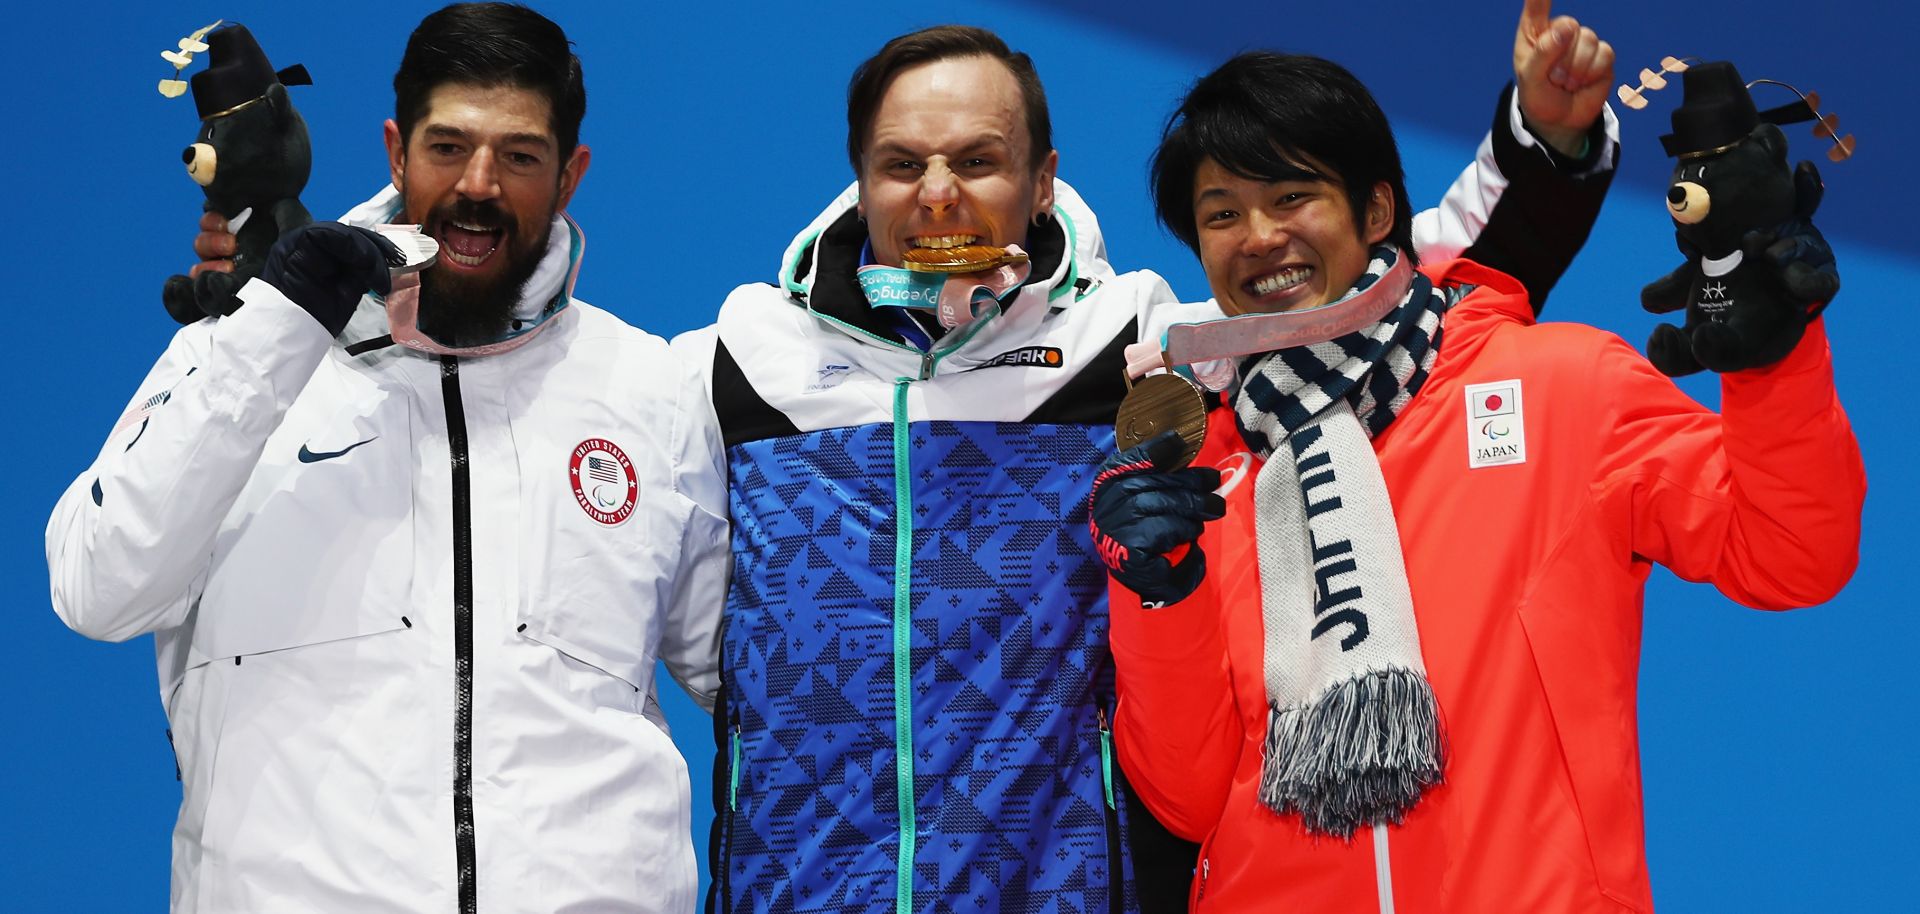 Finnish snowboarder Matti Suur-Hamari, center, celebrates his gold medal win with silver medalist Keith Gabel of the United States, left, and Gurimu Narita of Japan.